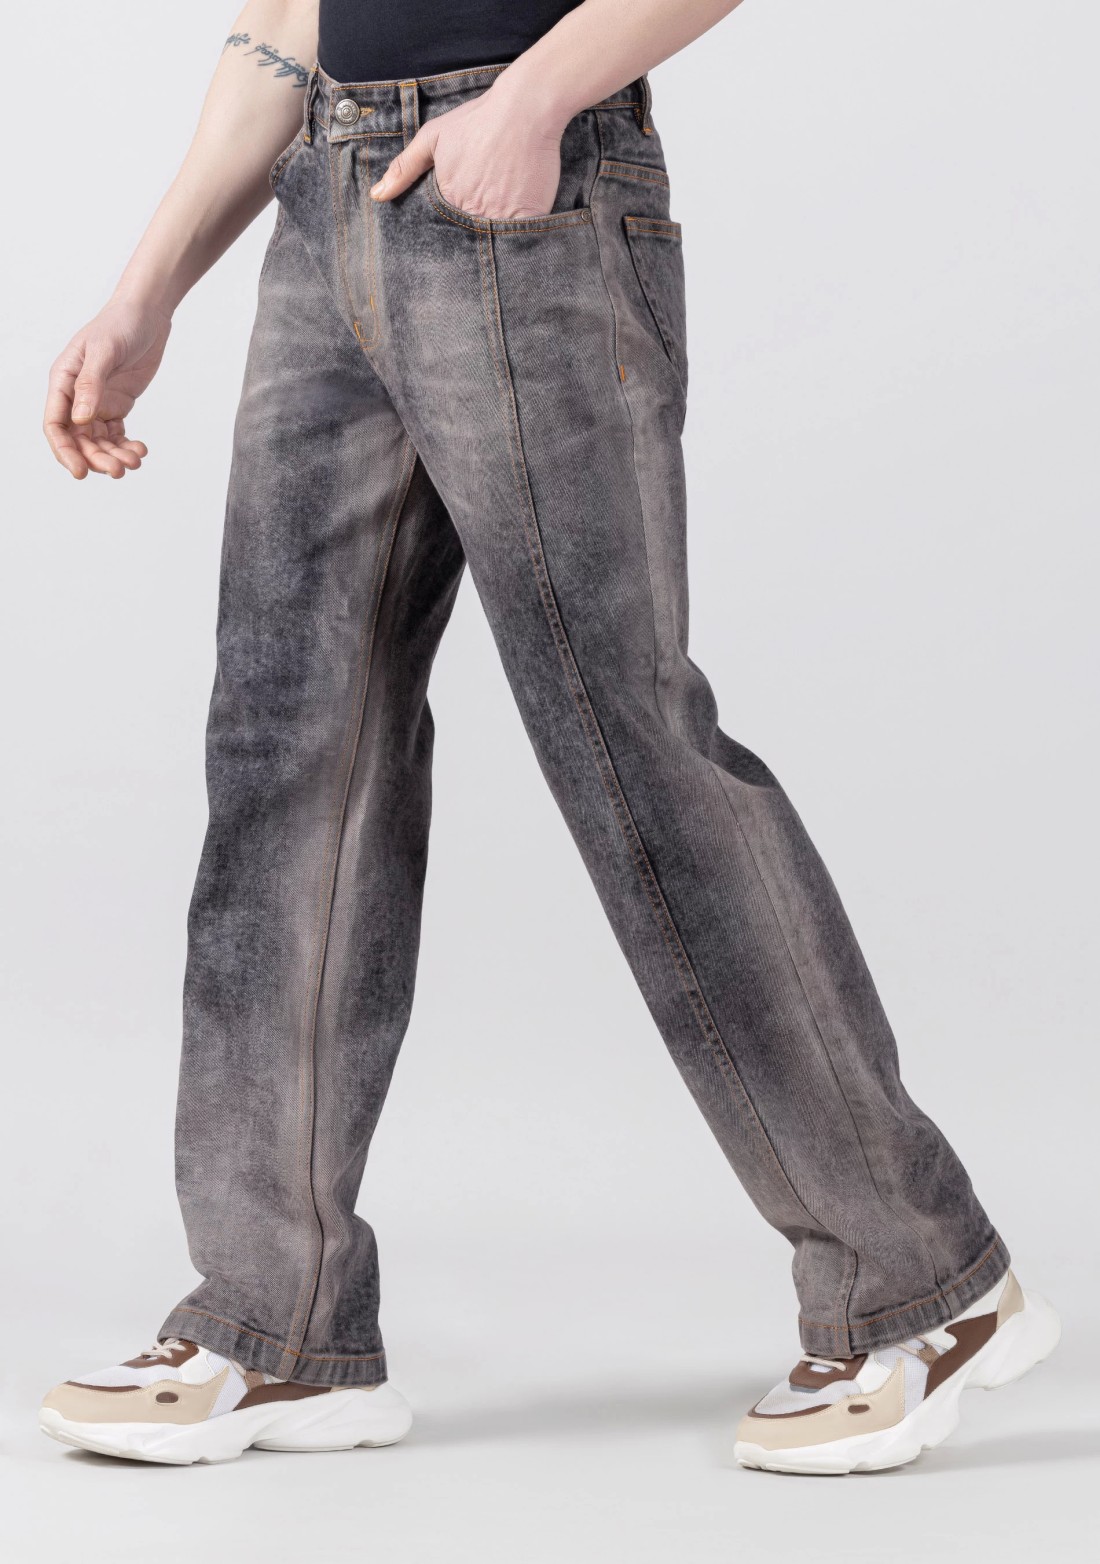 Blackish Brown Wide Leg Cut and Sew Men’s Jeans